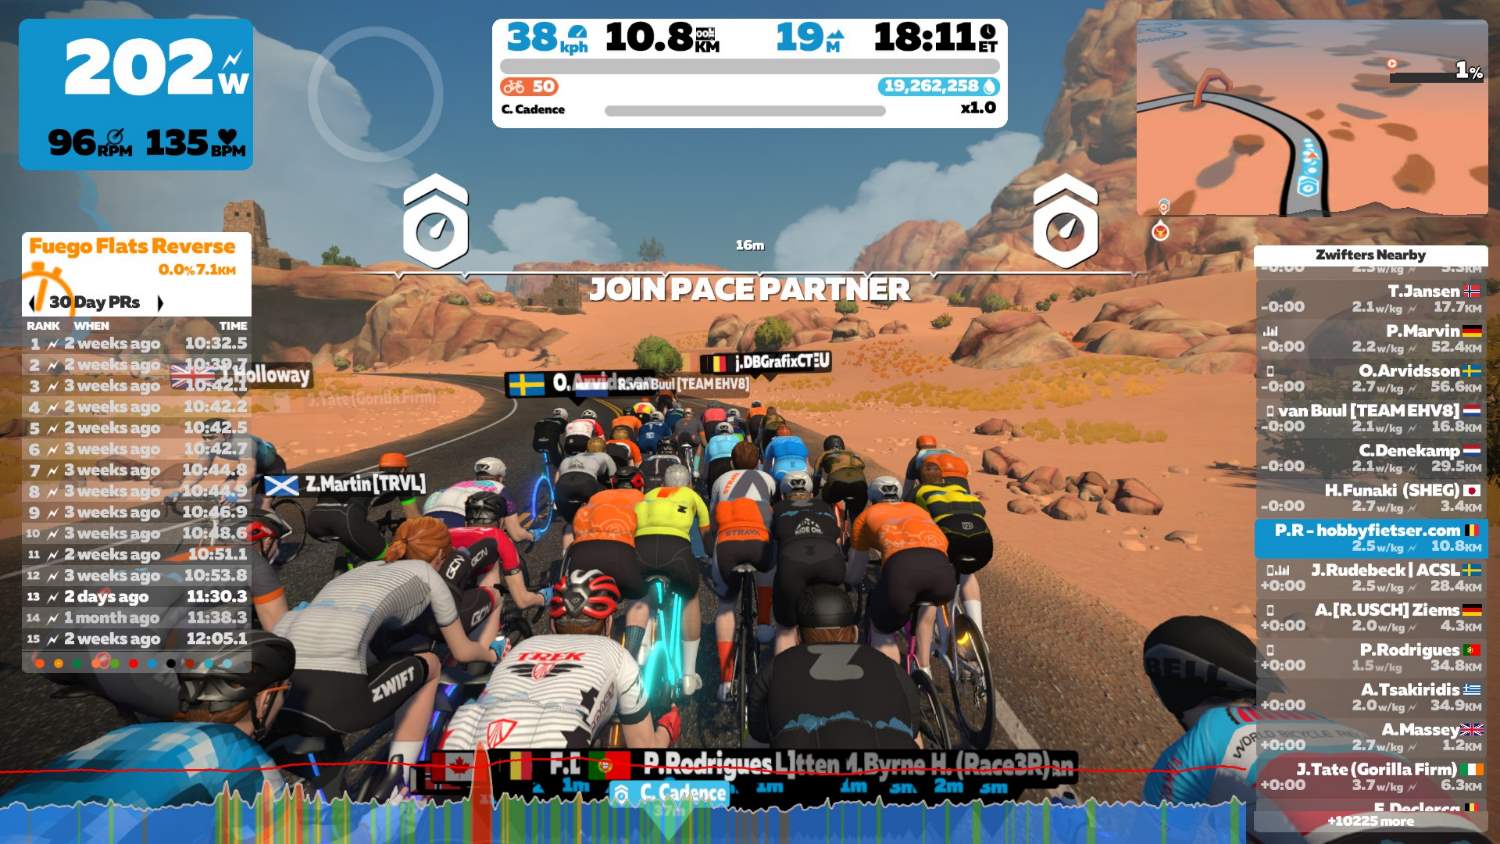 Pace Partners in Zwift